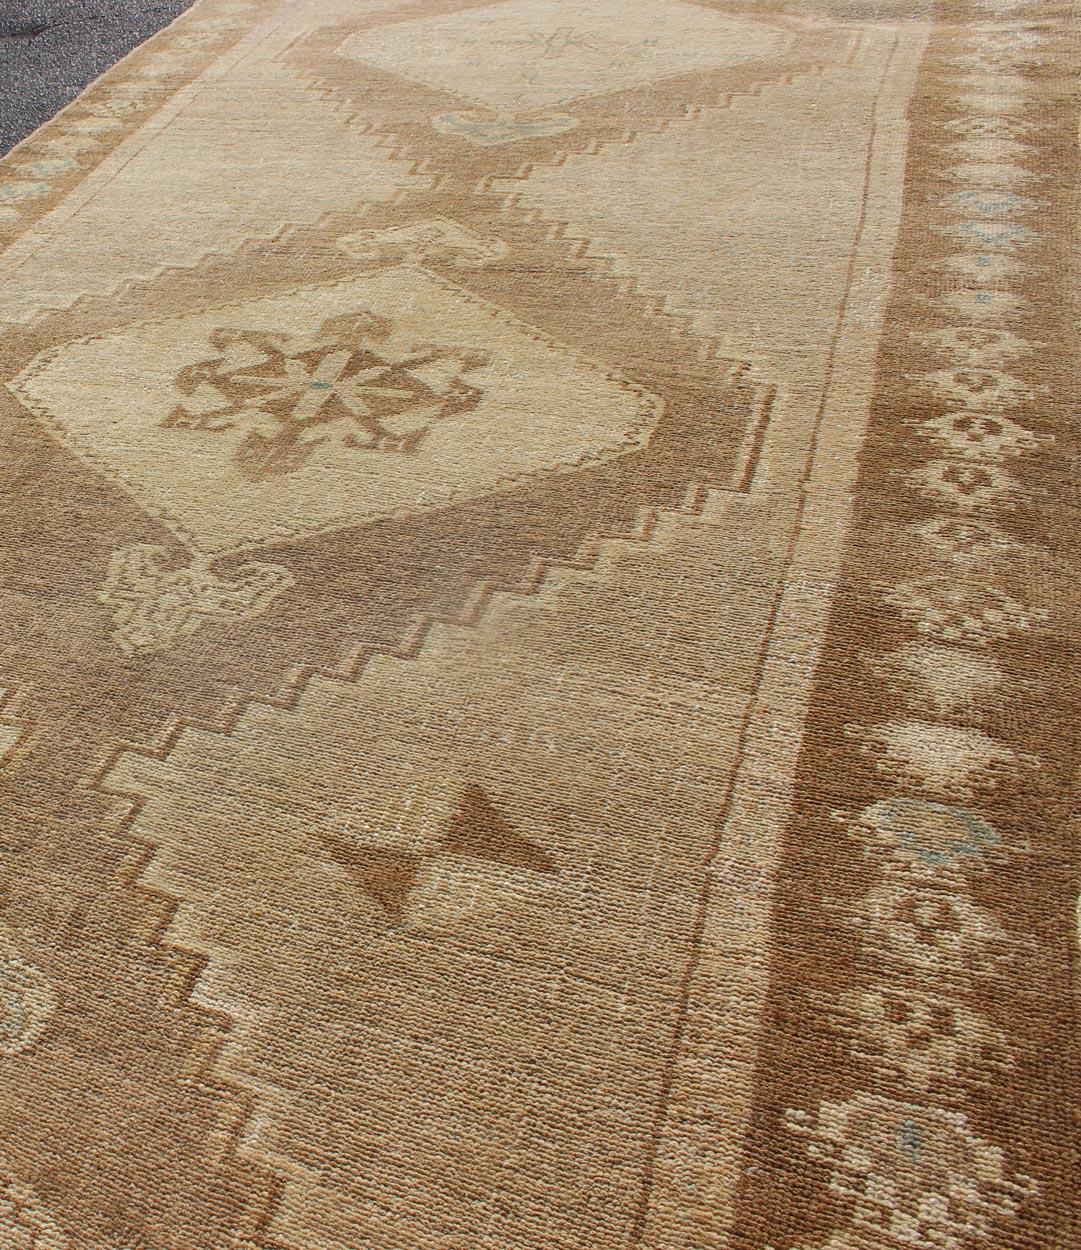 20th Century Large Gallery Turkish Rug in Earth Tones, Light Brown with Three Medallions For Sale